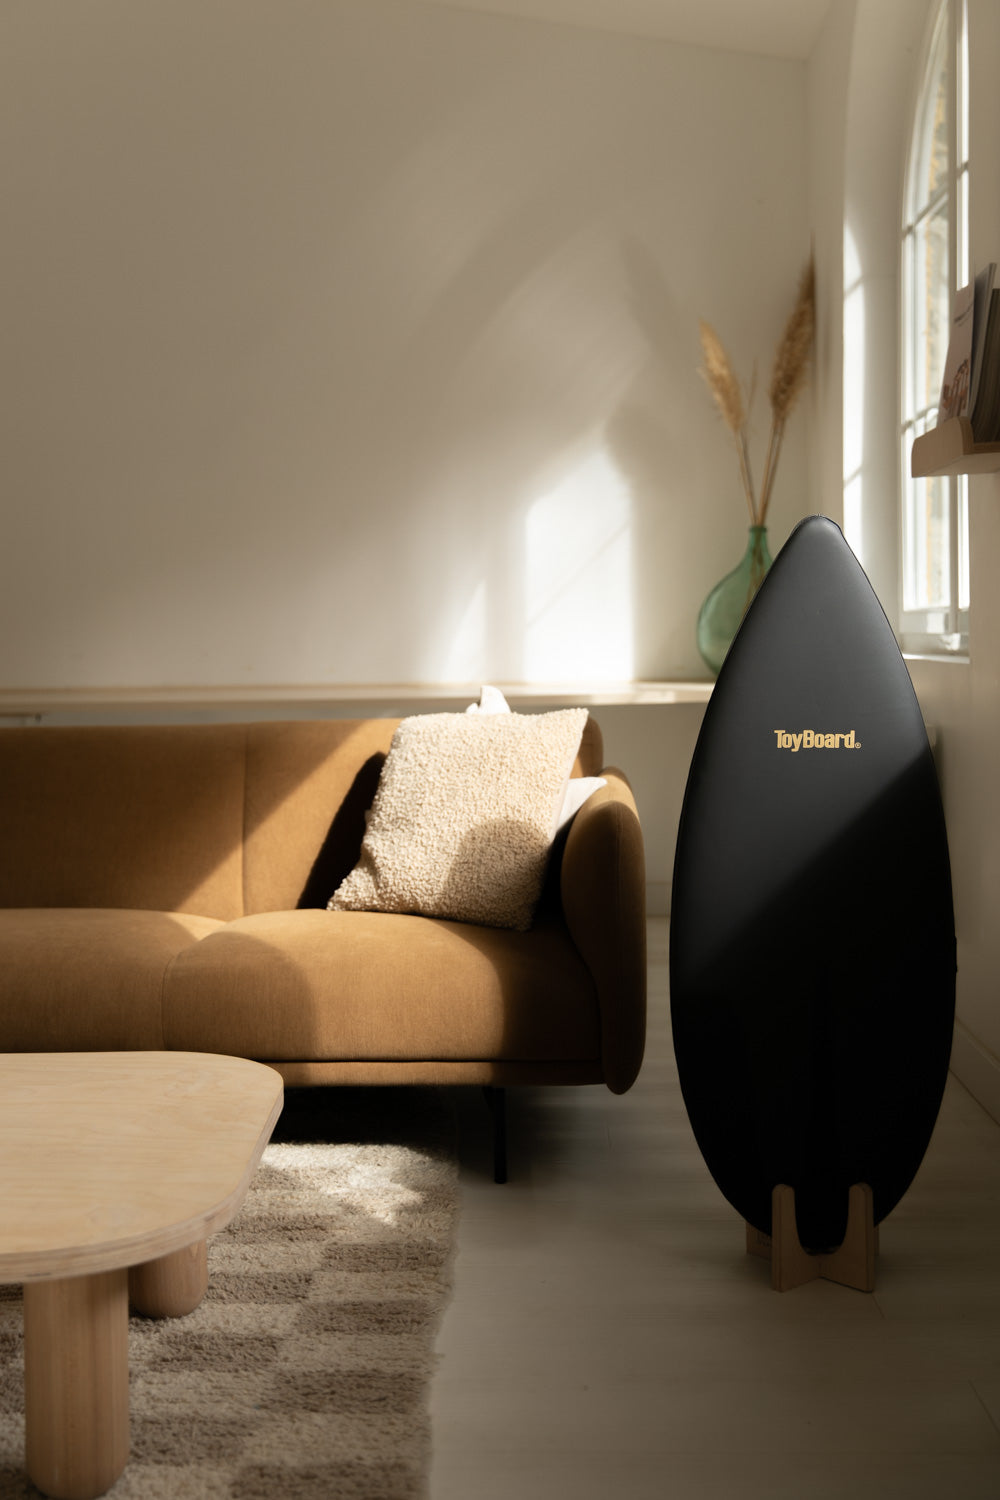 Deluxe Black Gold Balance Board ToyBoard in a chic decor